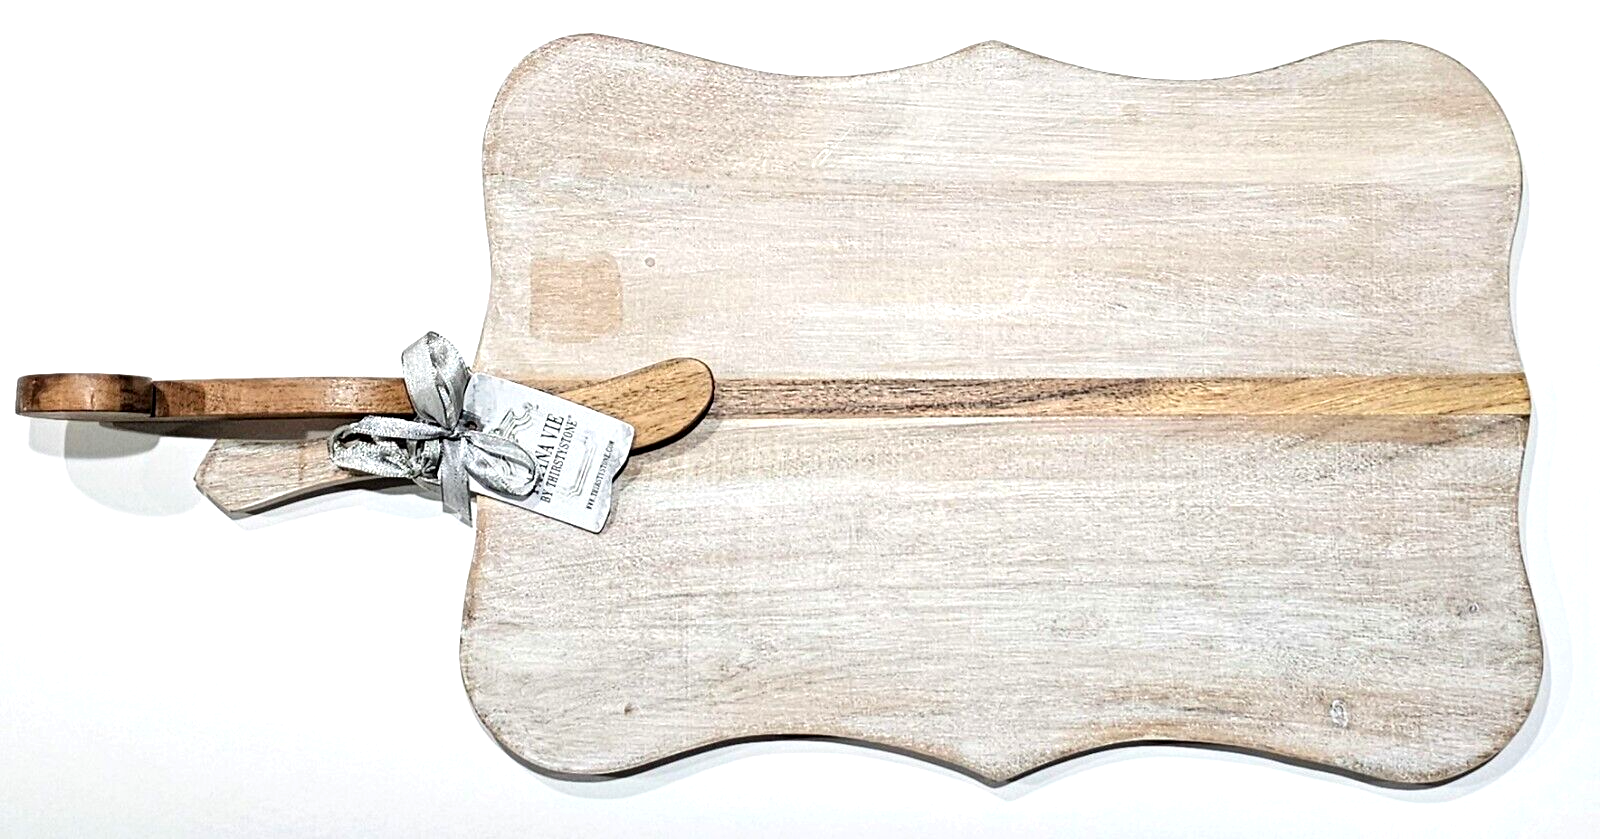 Primary image for Patina Vie By thirstystone 19 inch white wash cheese board with spreader